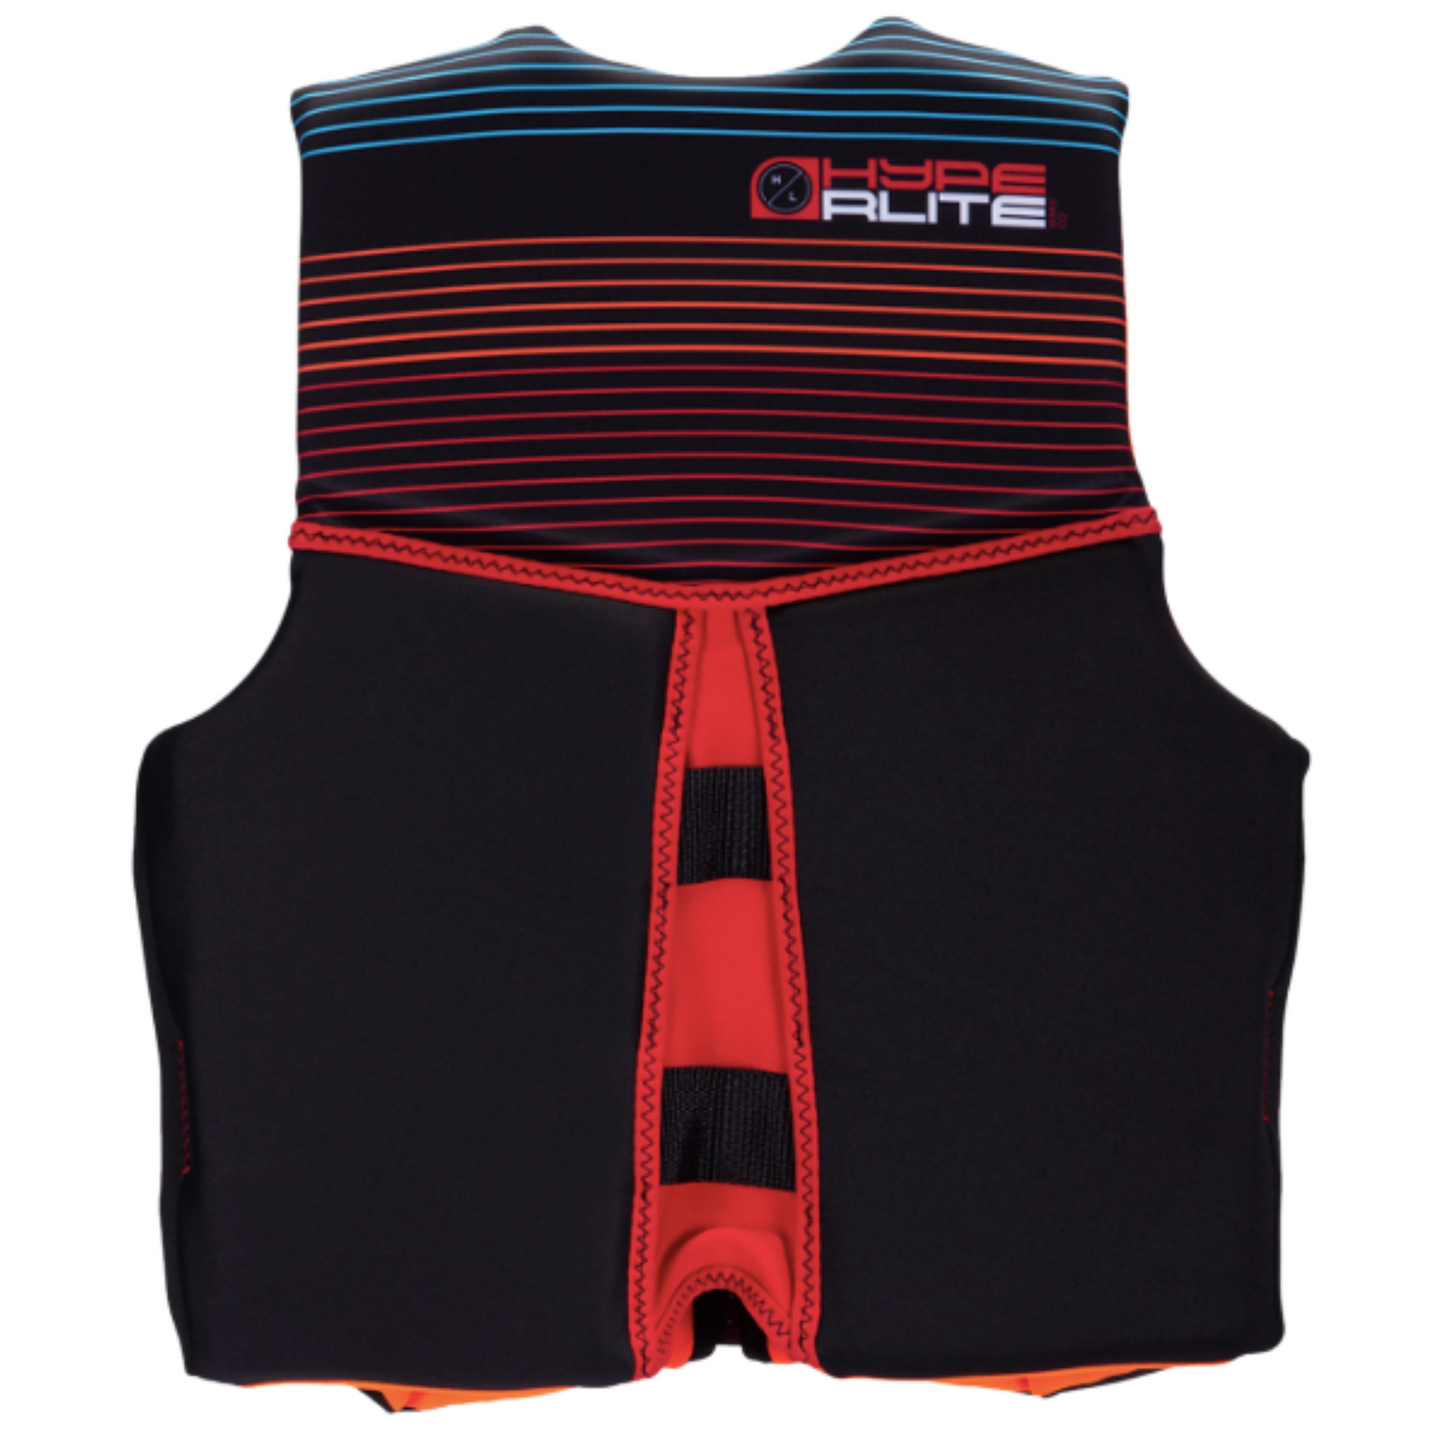 Hyperlite Boys Youth Indy Life Jacket in Black, red, orange, and blue